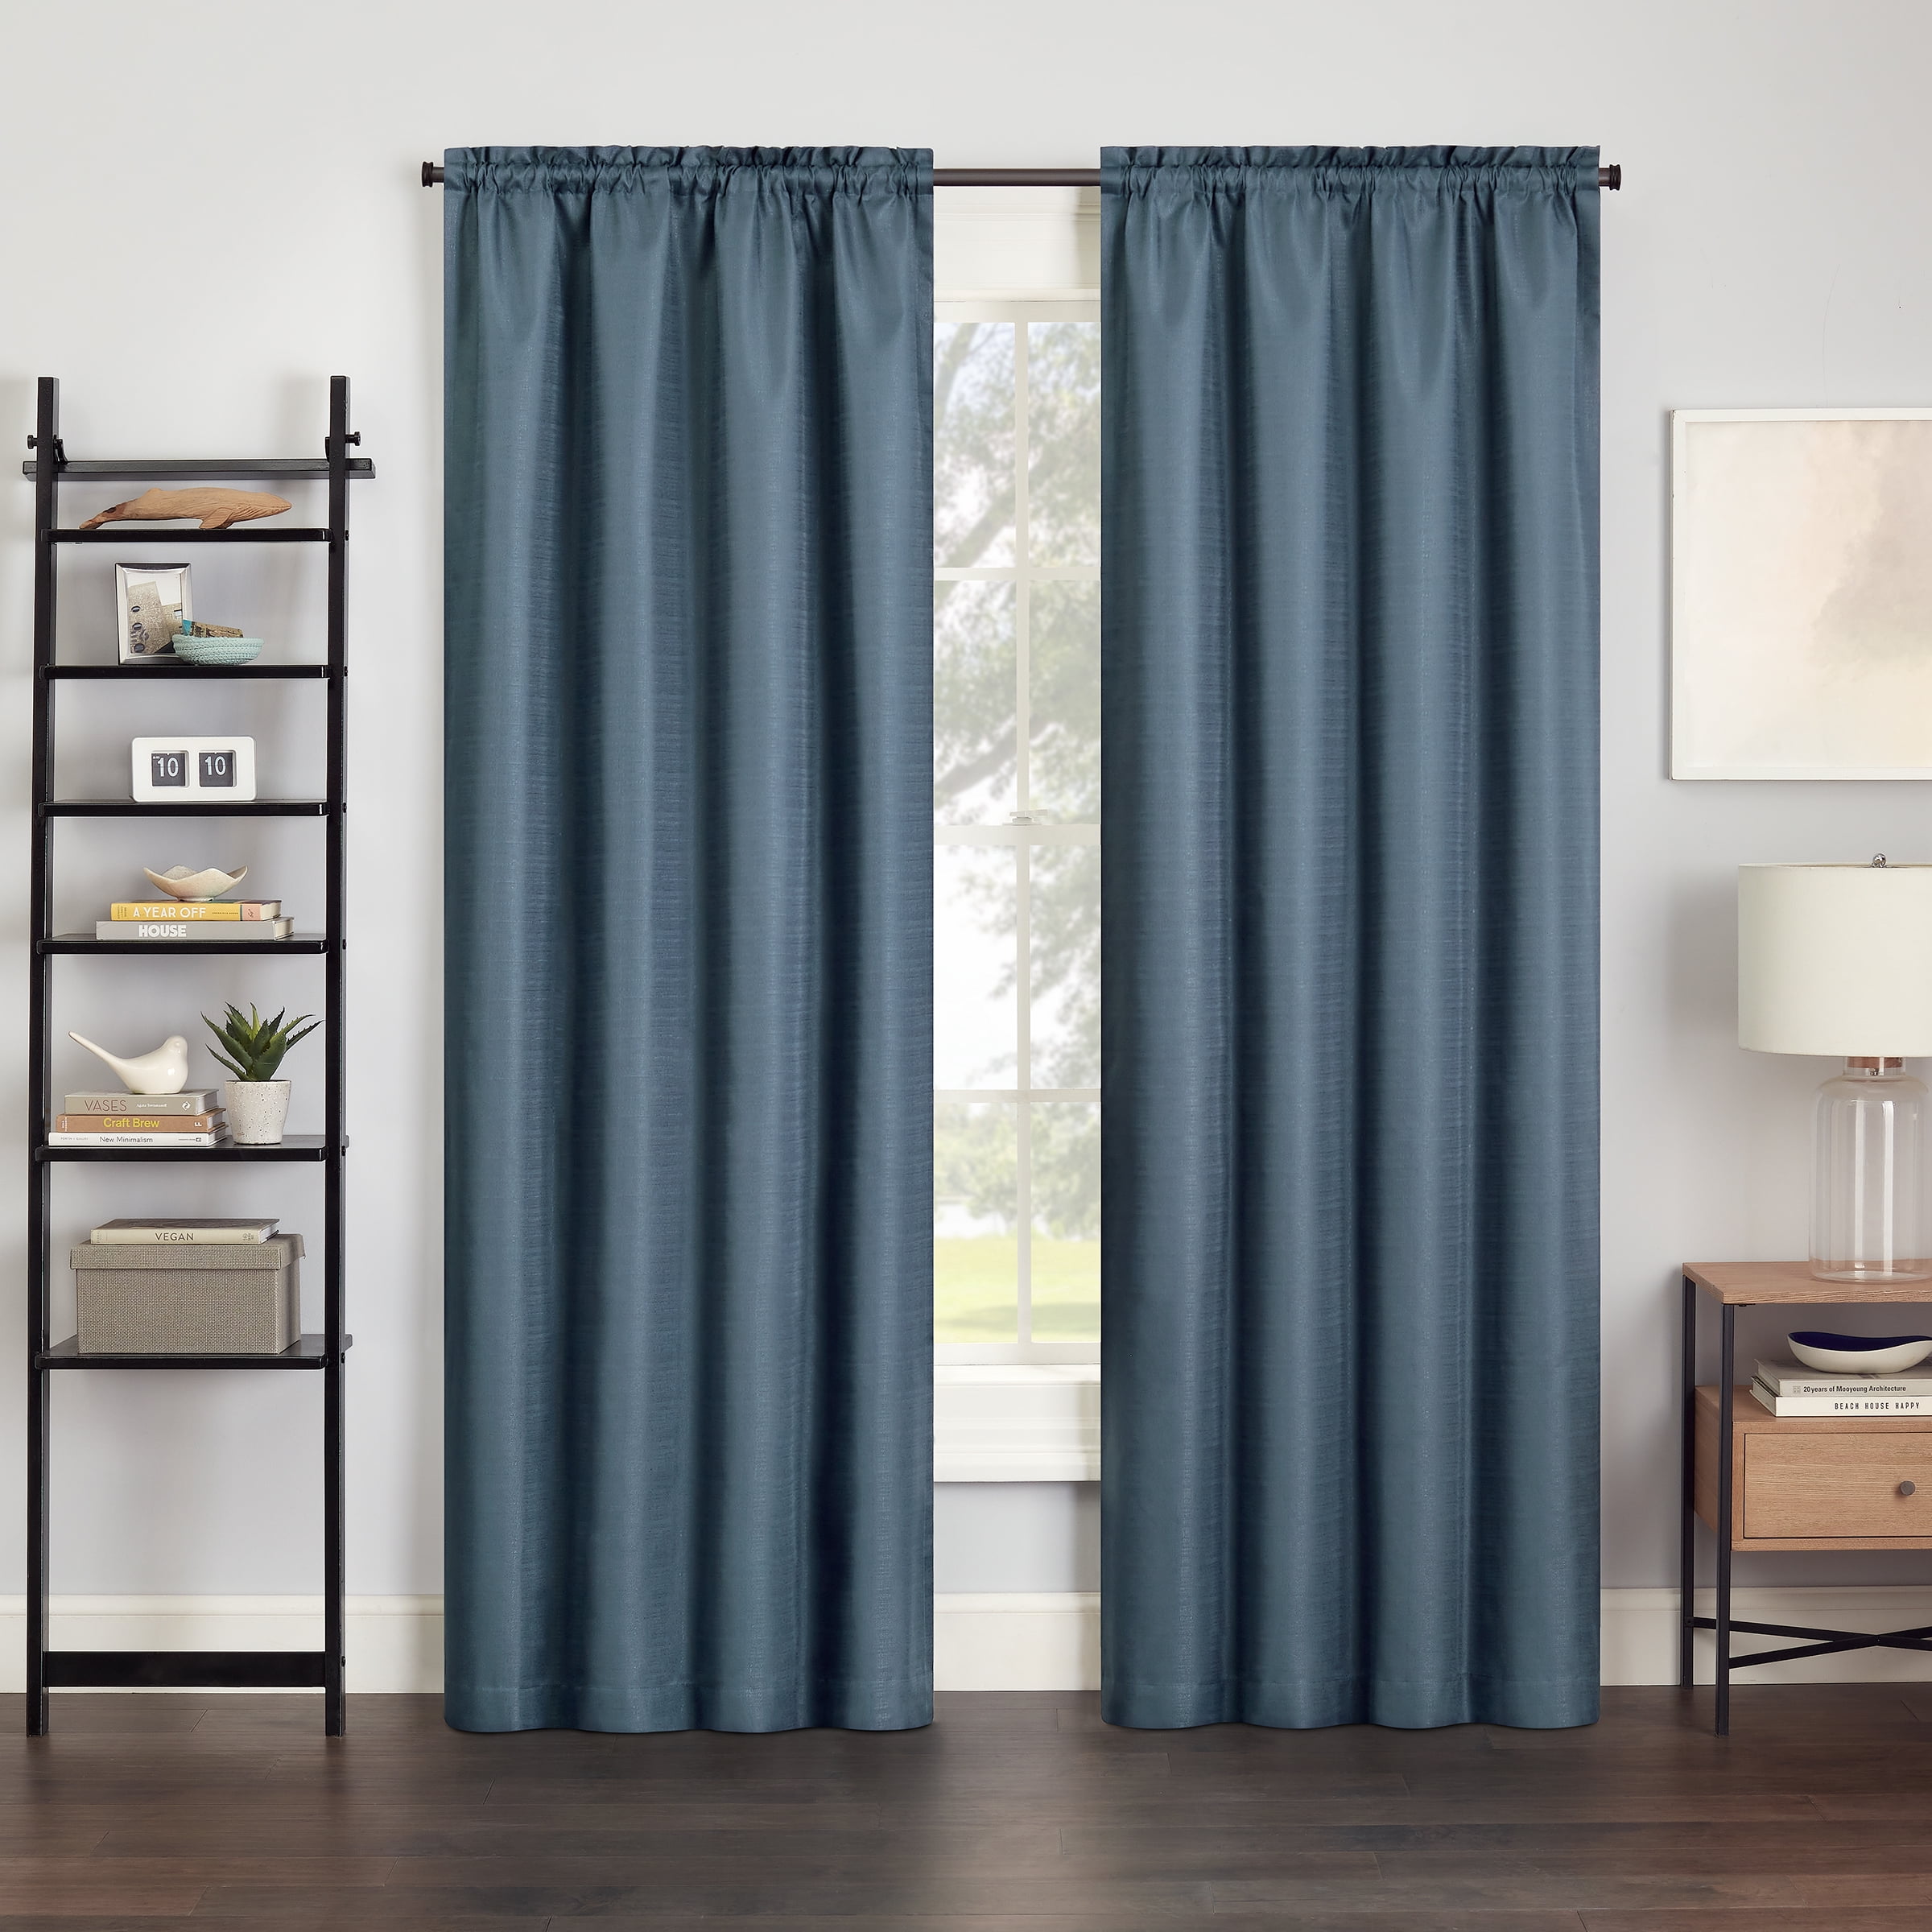 Thermal Curtain Panel Denim 42 Inch X 63 Inch Eclipse Kids Kendall Blackout 